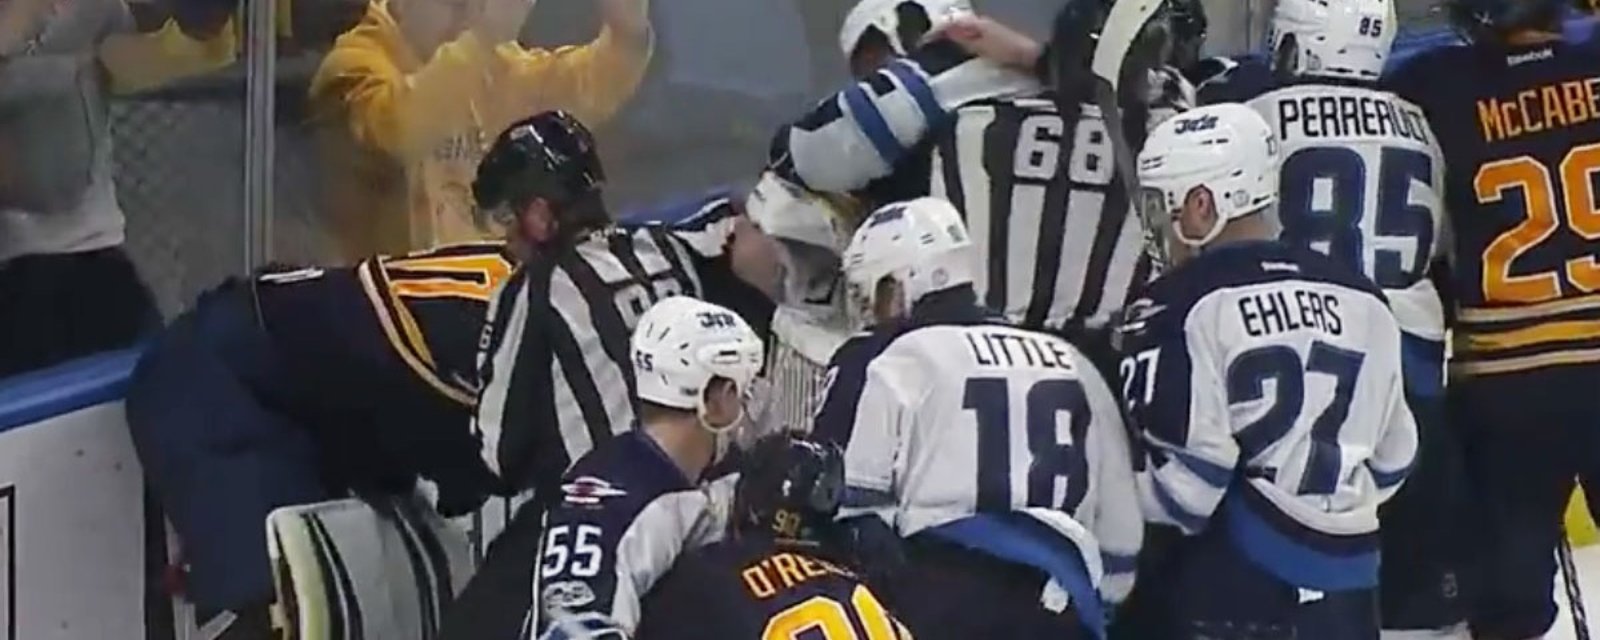 Must See: Lehner and Byfuglien goes at it in full-on line brawl!